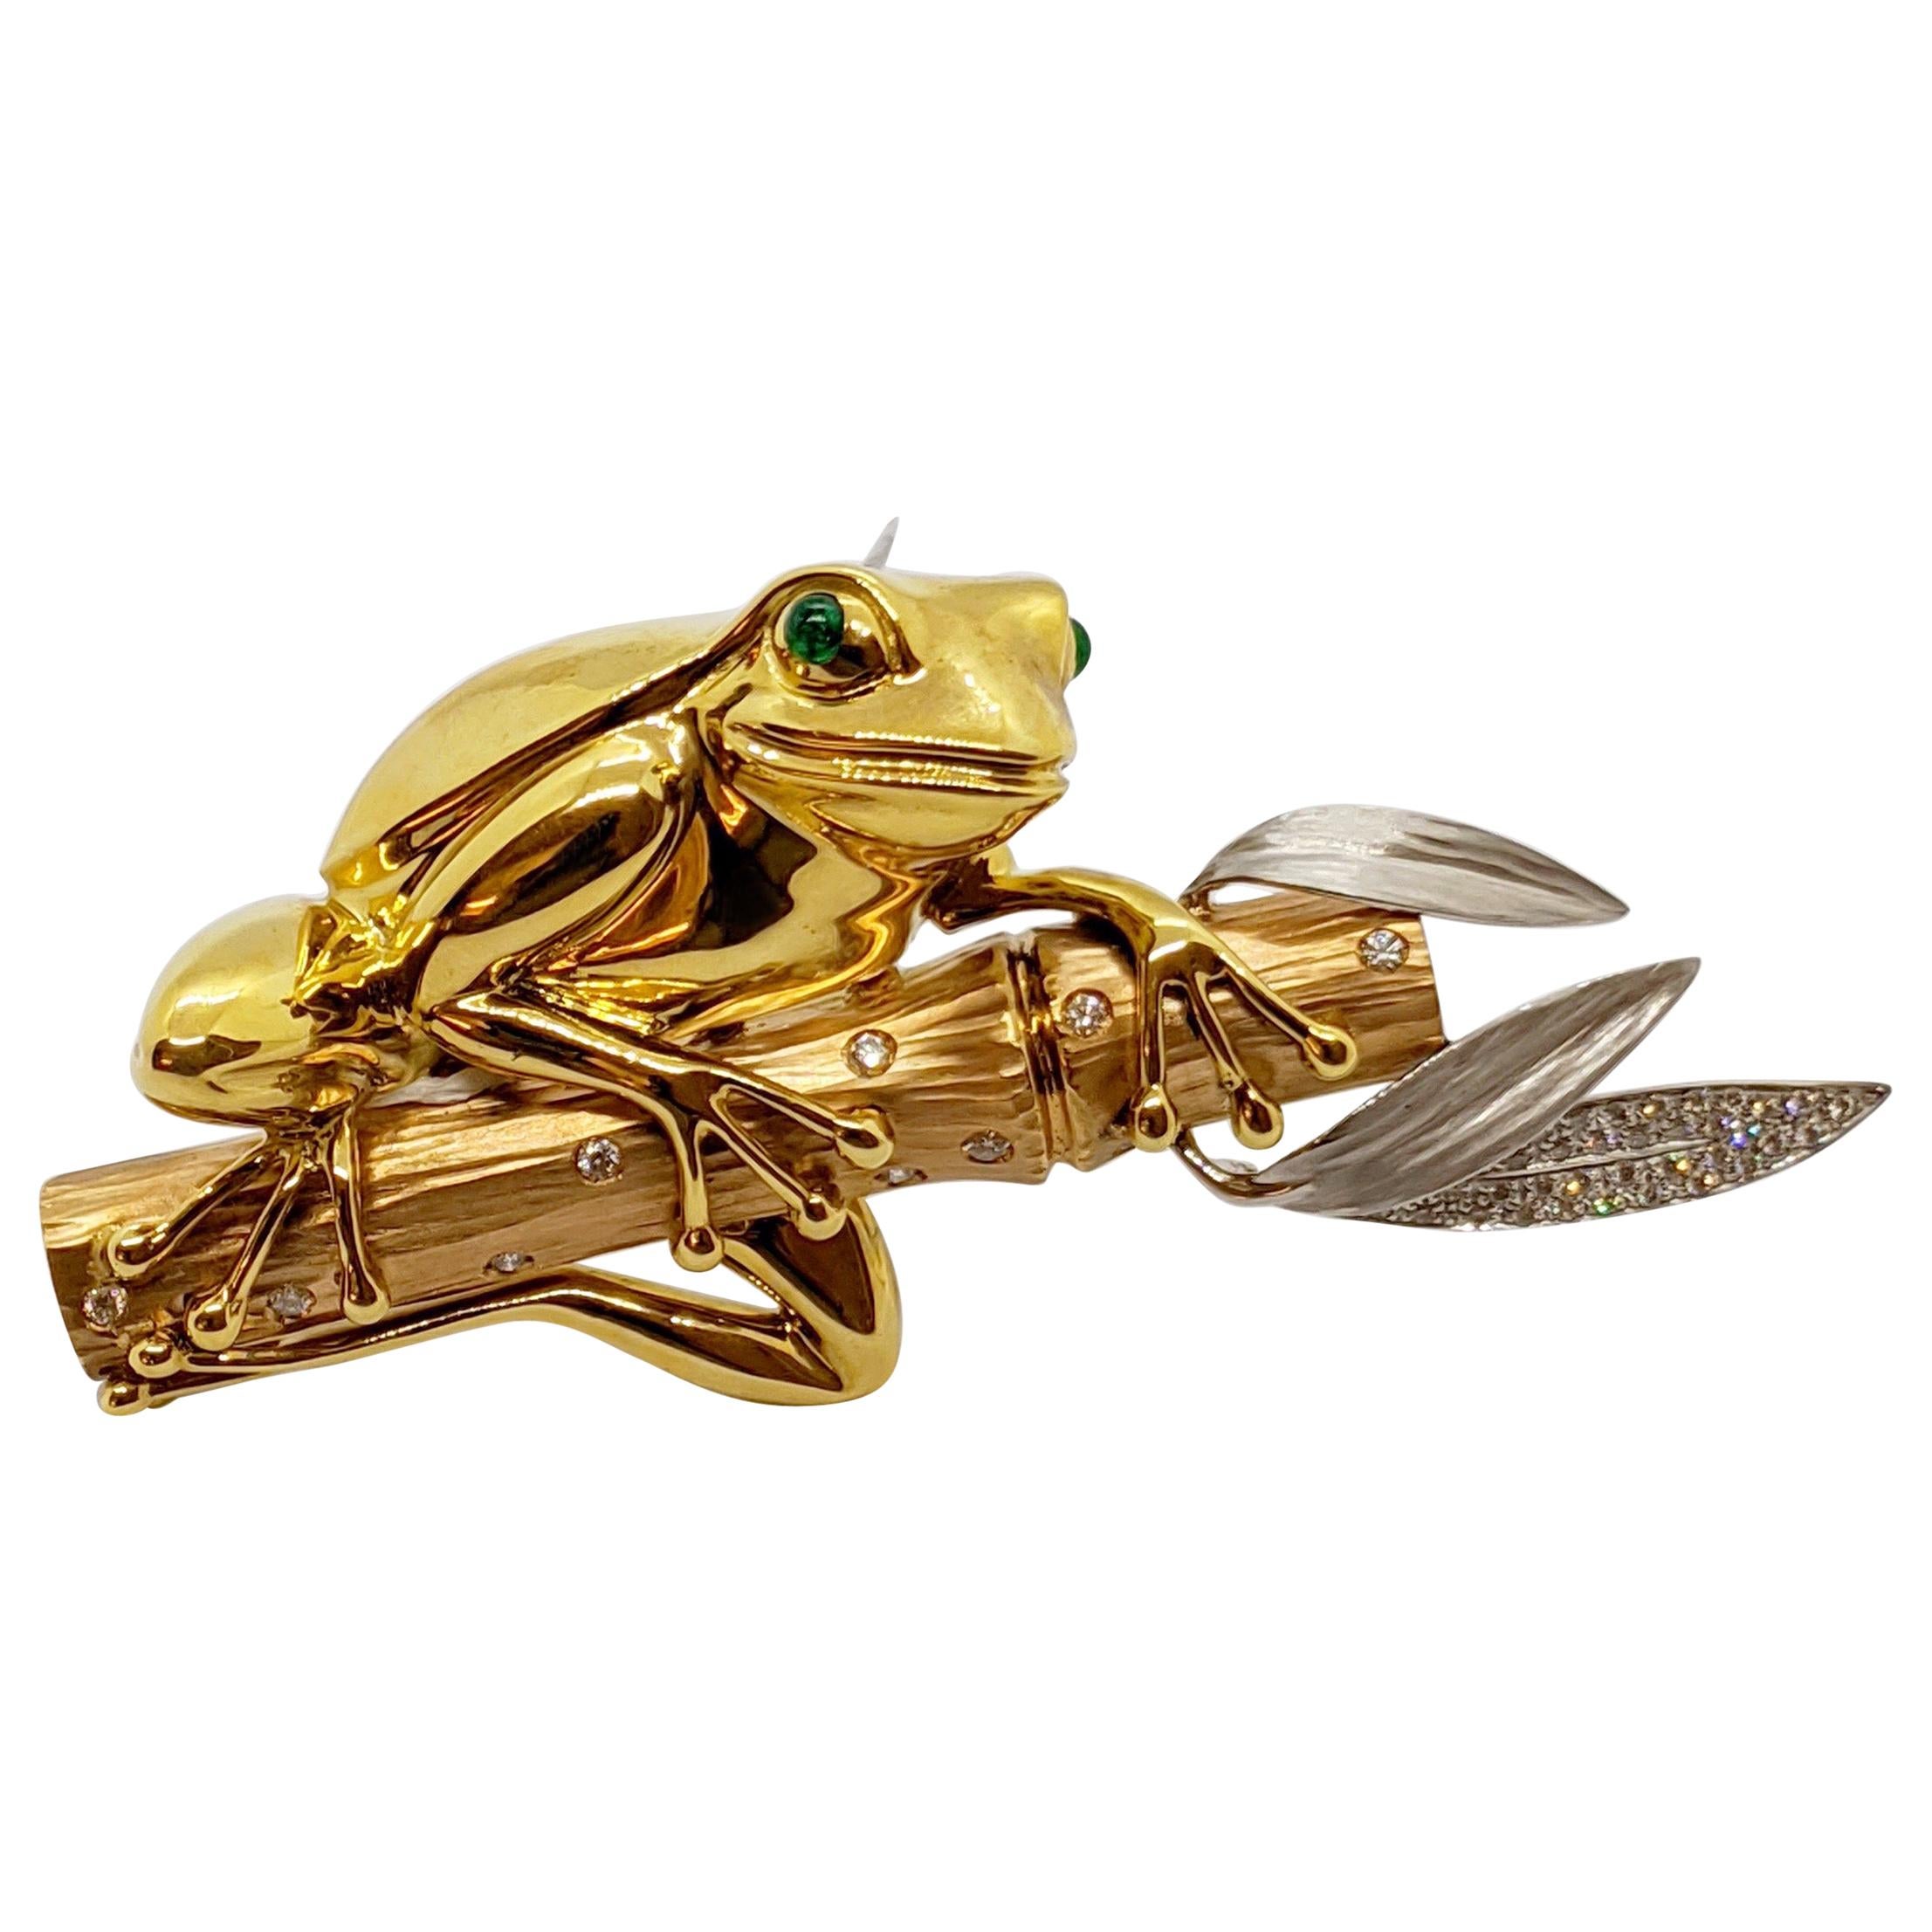 18 Karat Tri-Colored Gold Frog Brooch with Diamonds and Emeralds